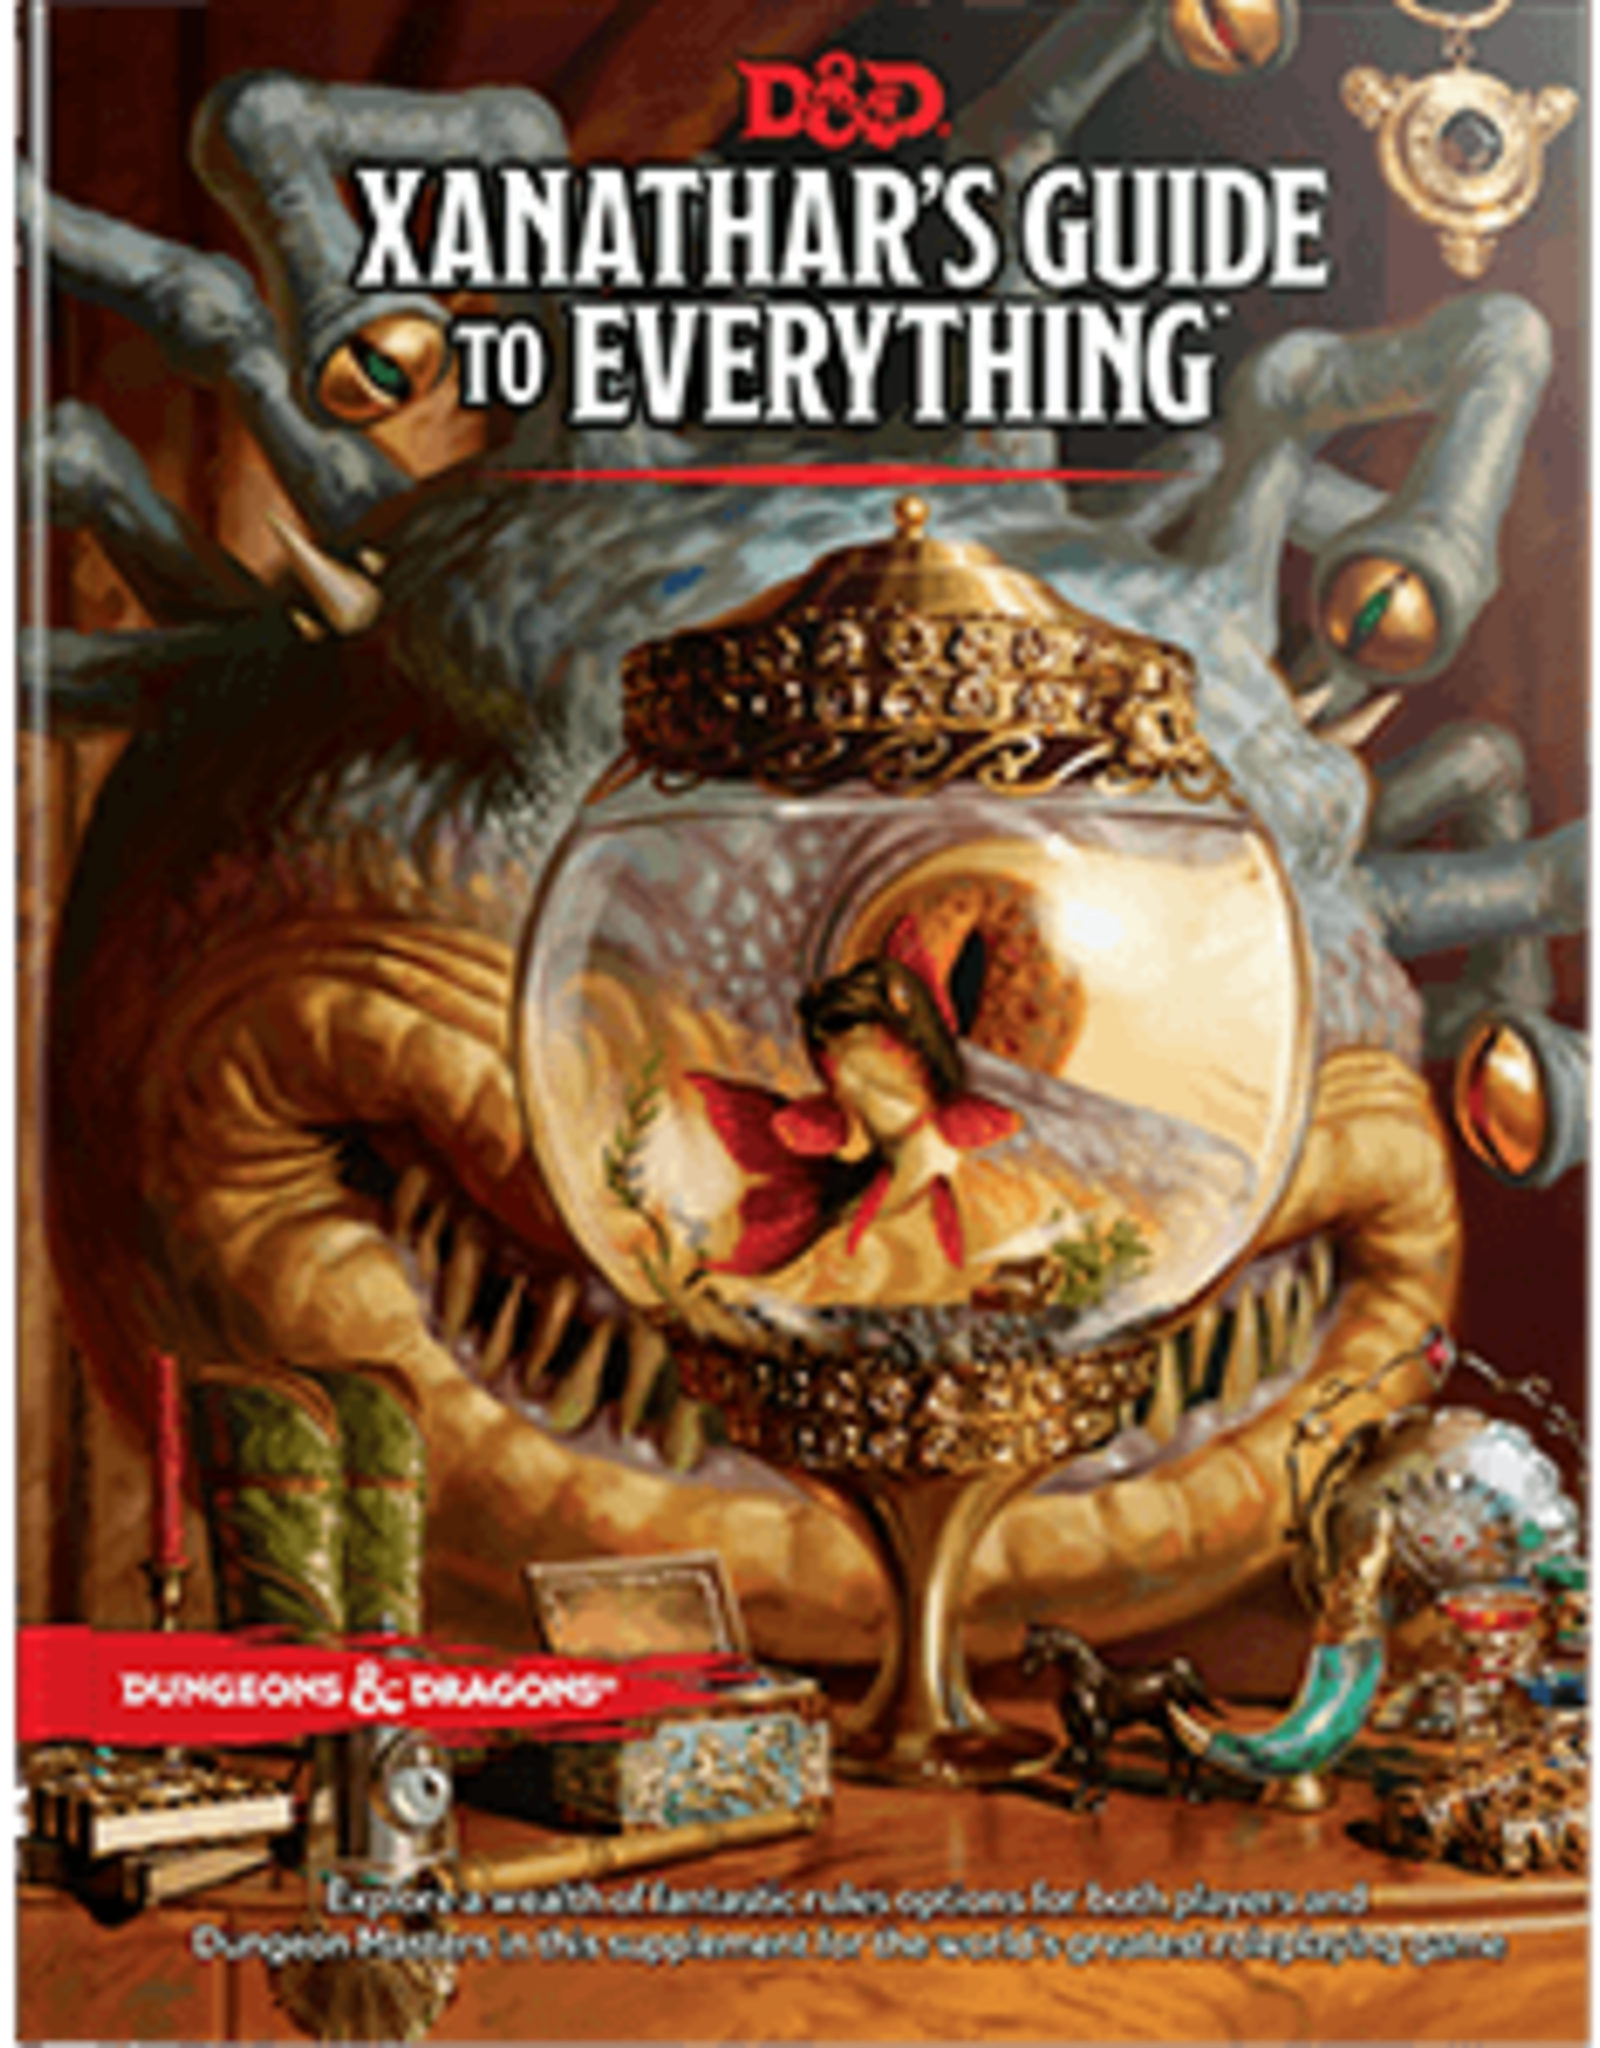 Wizards of the Coast D&D Xanathar's Guide to Everything